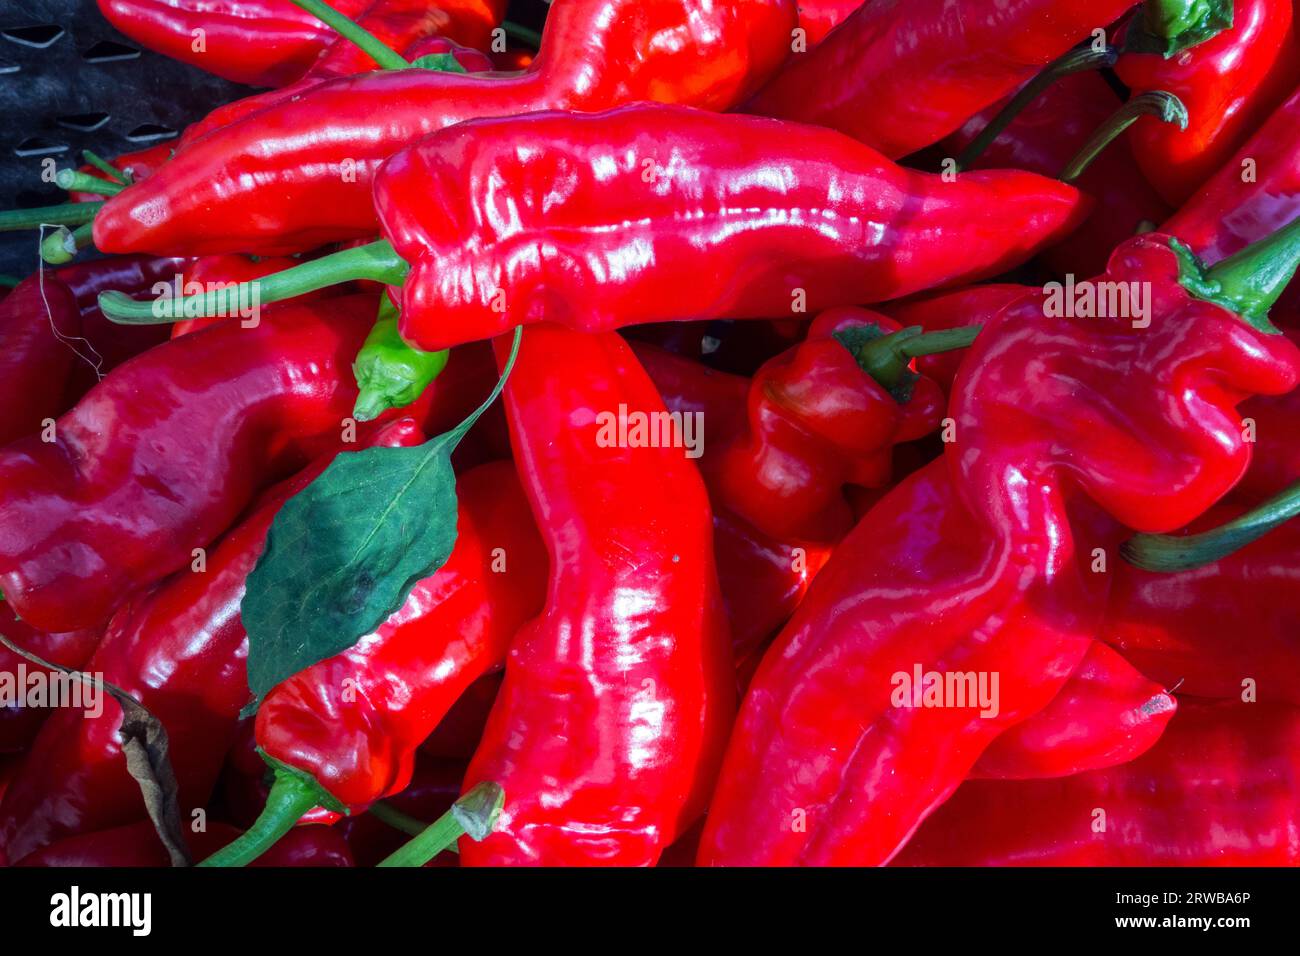 Close-up of South American red Cayenne chili peppers Stock Photo